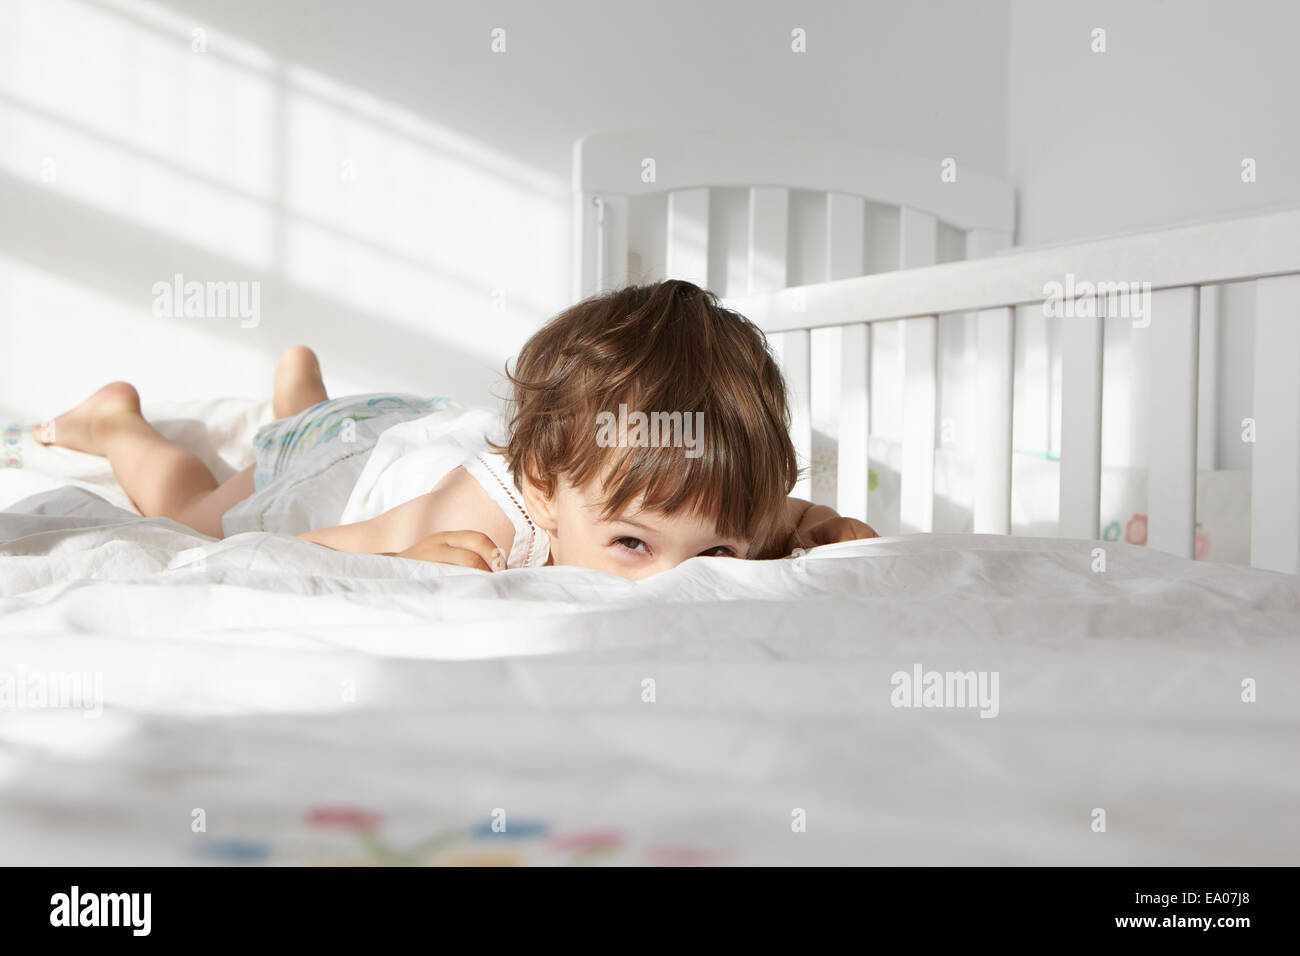 Candid portrait of female toddler peeking over bed quilt Stock Photo